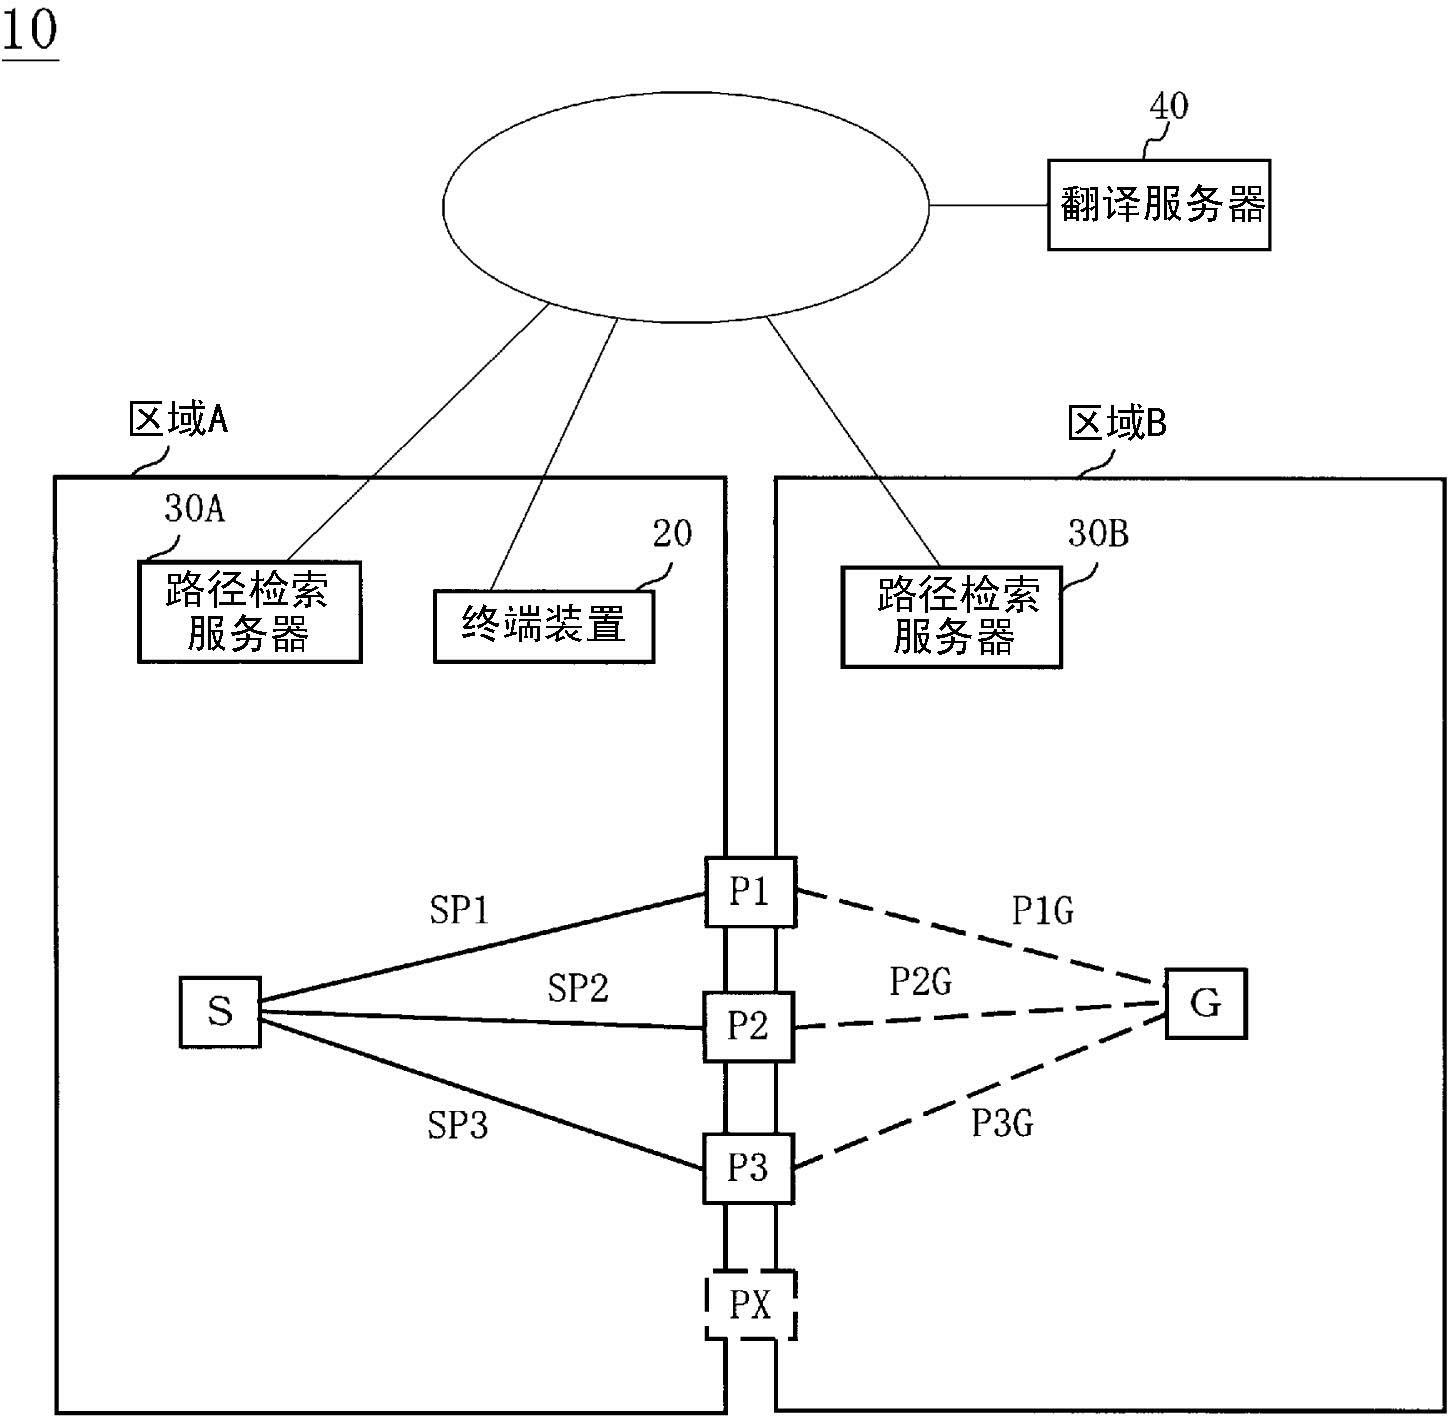 Navigation system, route search server, route search agent server, and navigation method